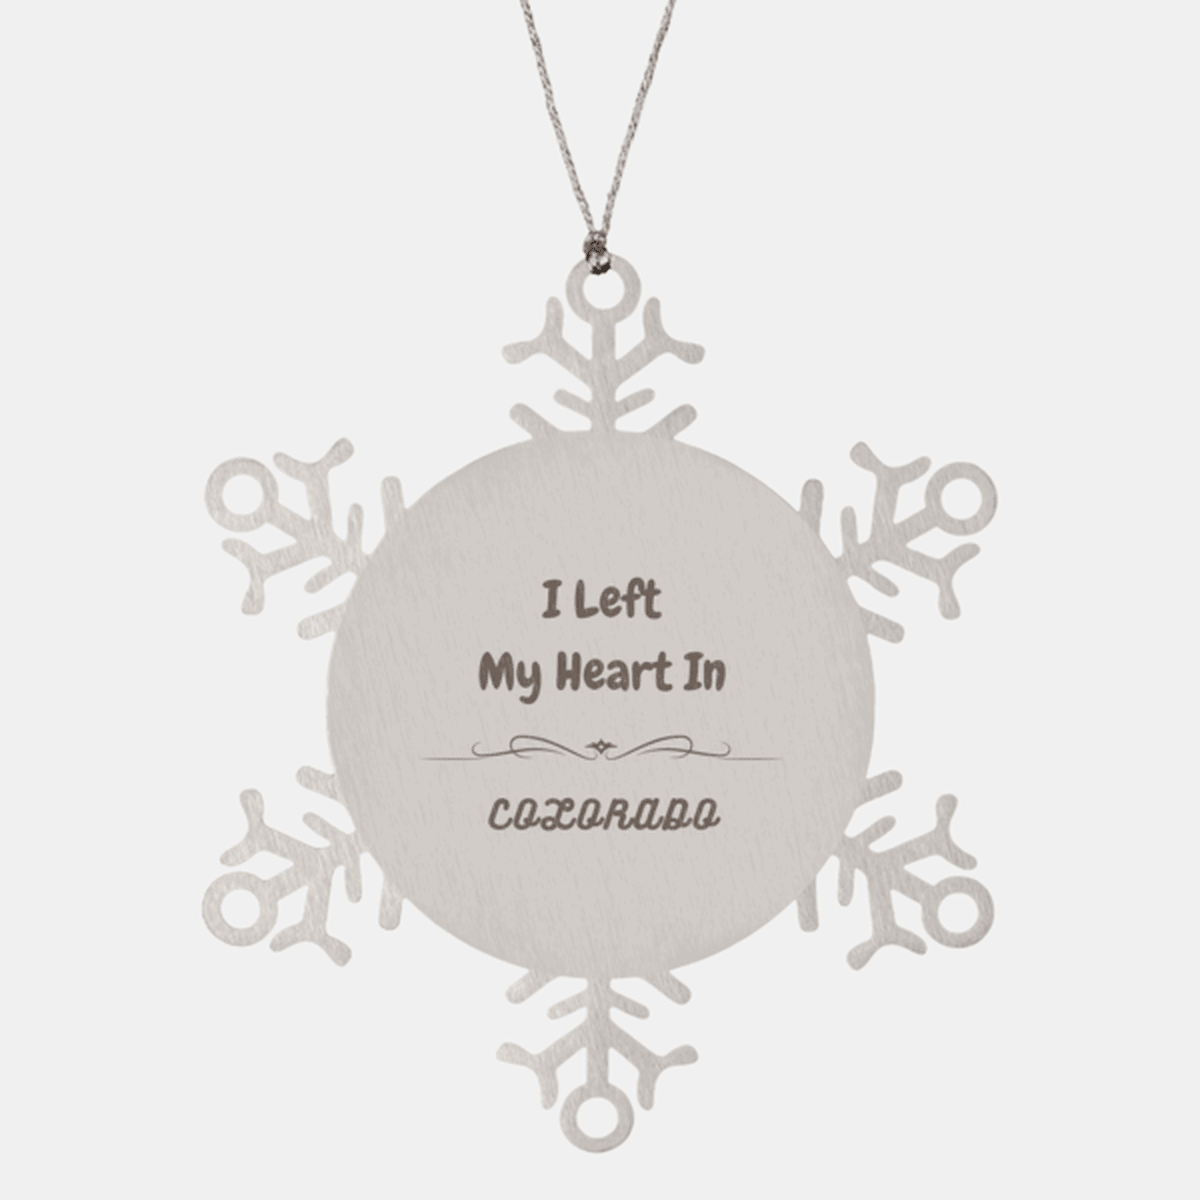 I Left My Heart In Colorado Gifts, Meaningful Colorado State for Friends, Men, Women. Snowflake Ornament for Colorado People - Mallard Moon Gift Shop